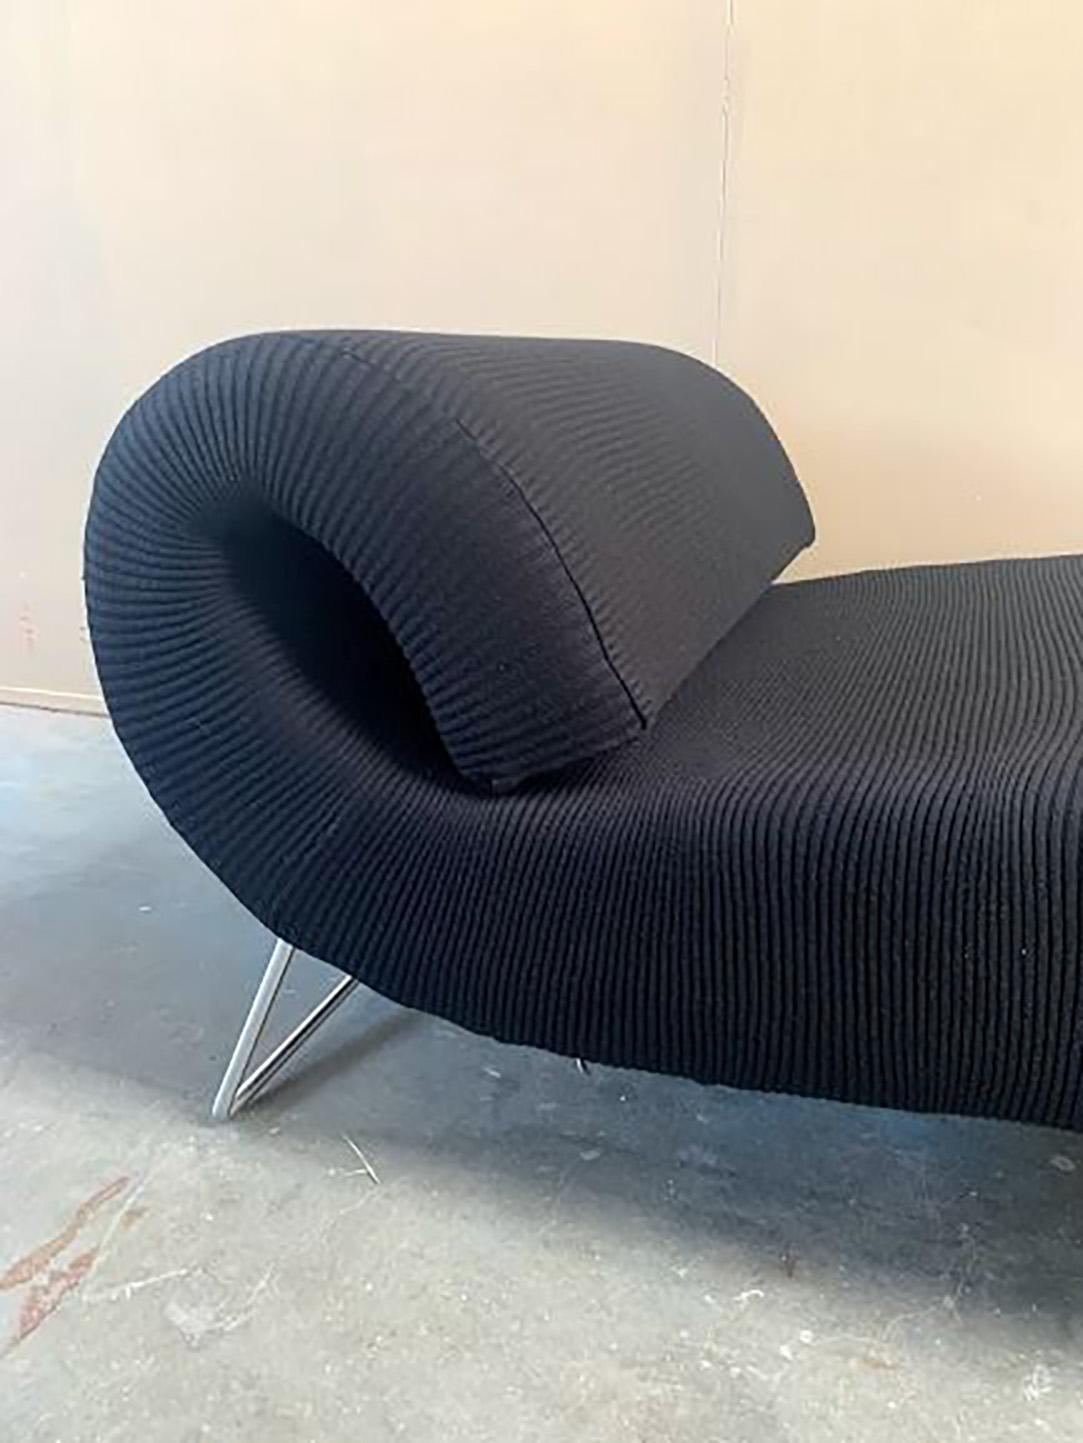 Fabric Pascal Mourgue, Ligne Roset, Sofa, Daybed 2004